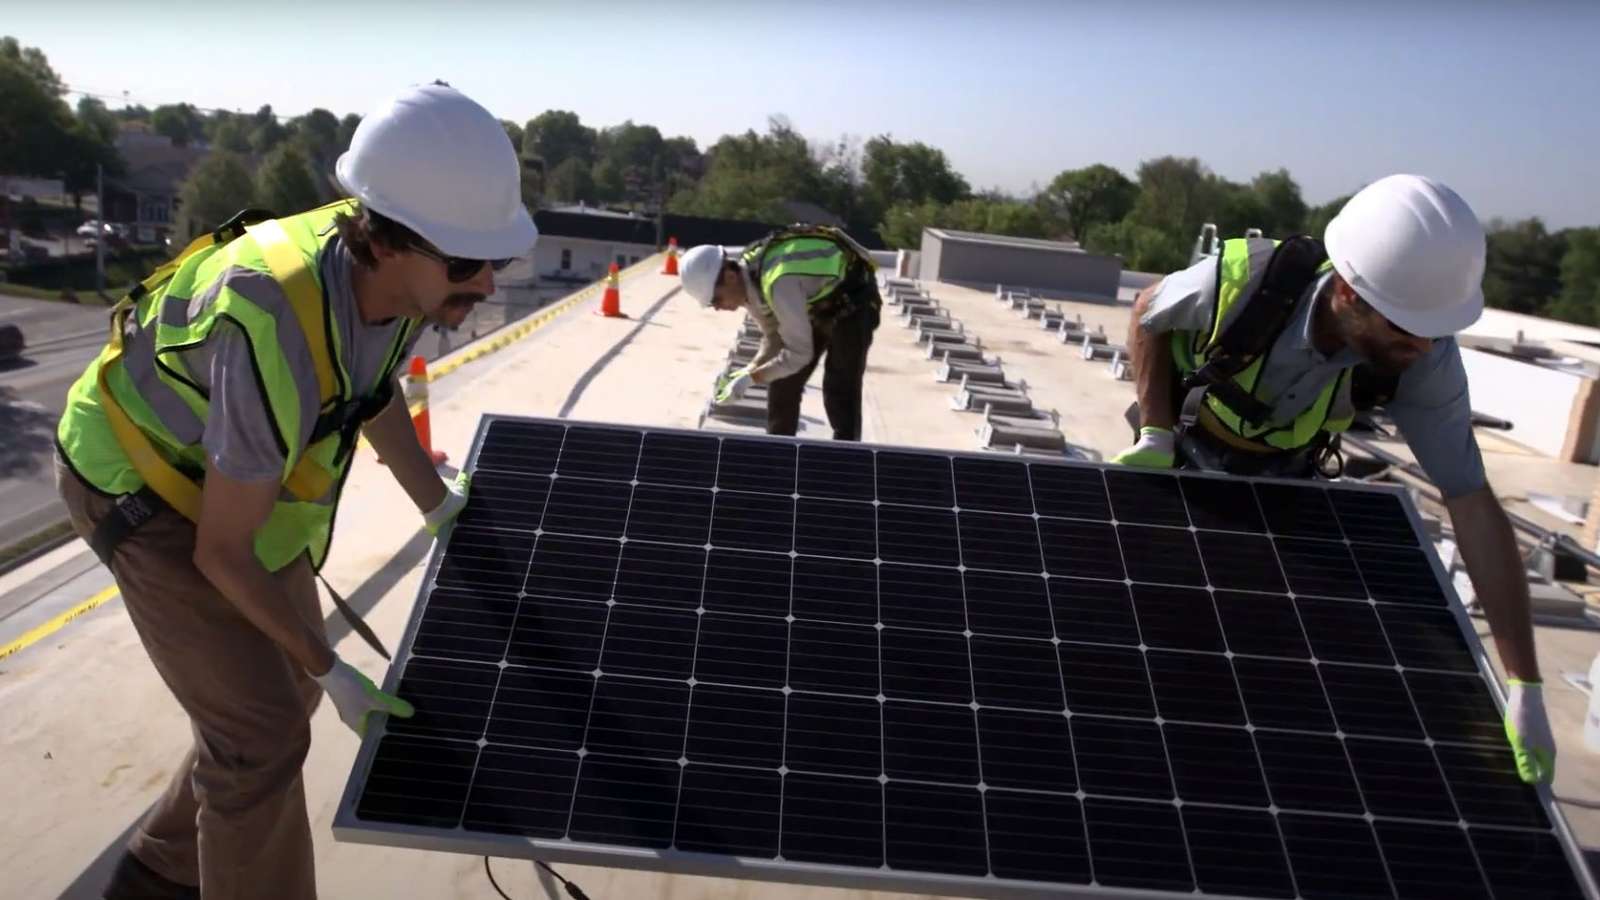 workers installing a solar panel on a roof